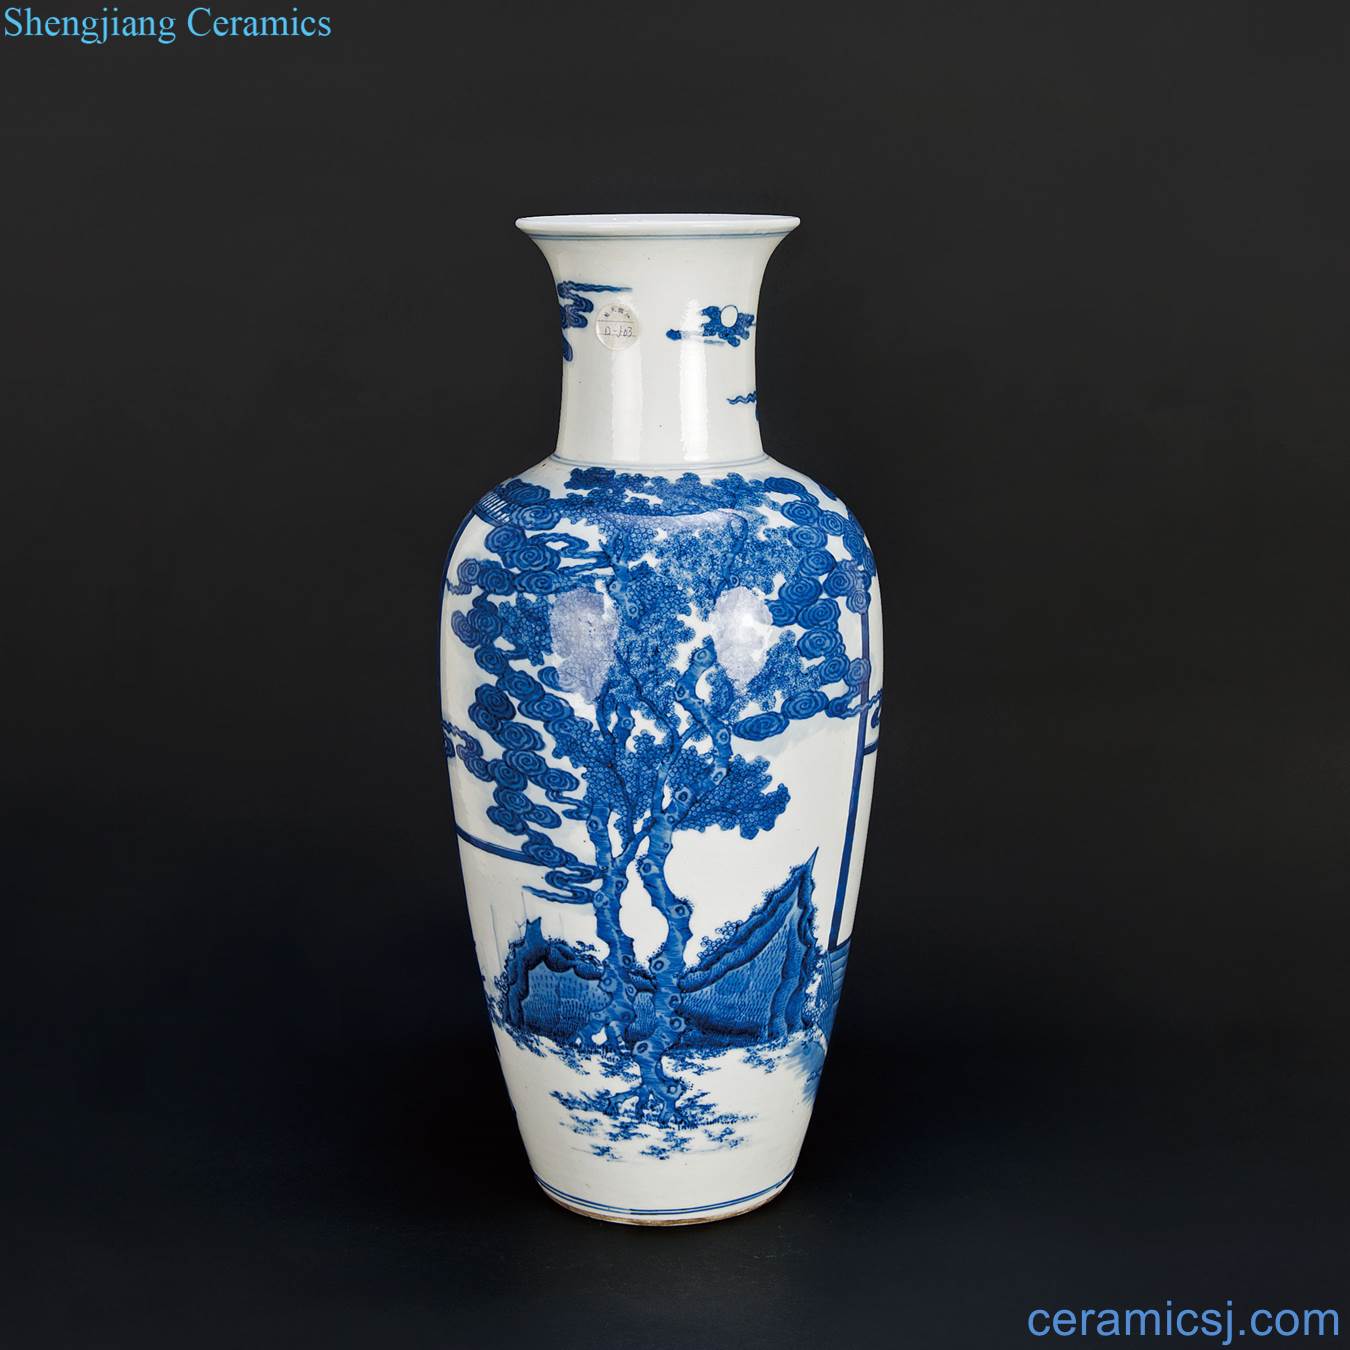 Qing guangxu Stories of blue and white lines bottle (a)